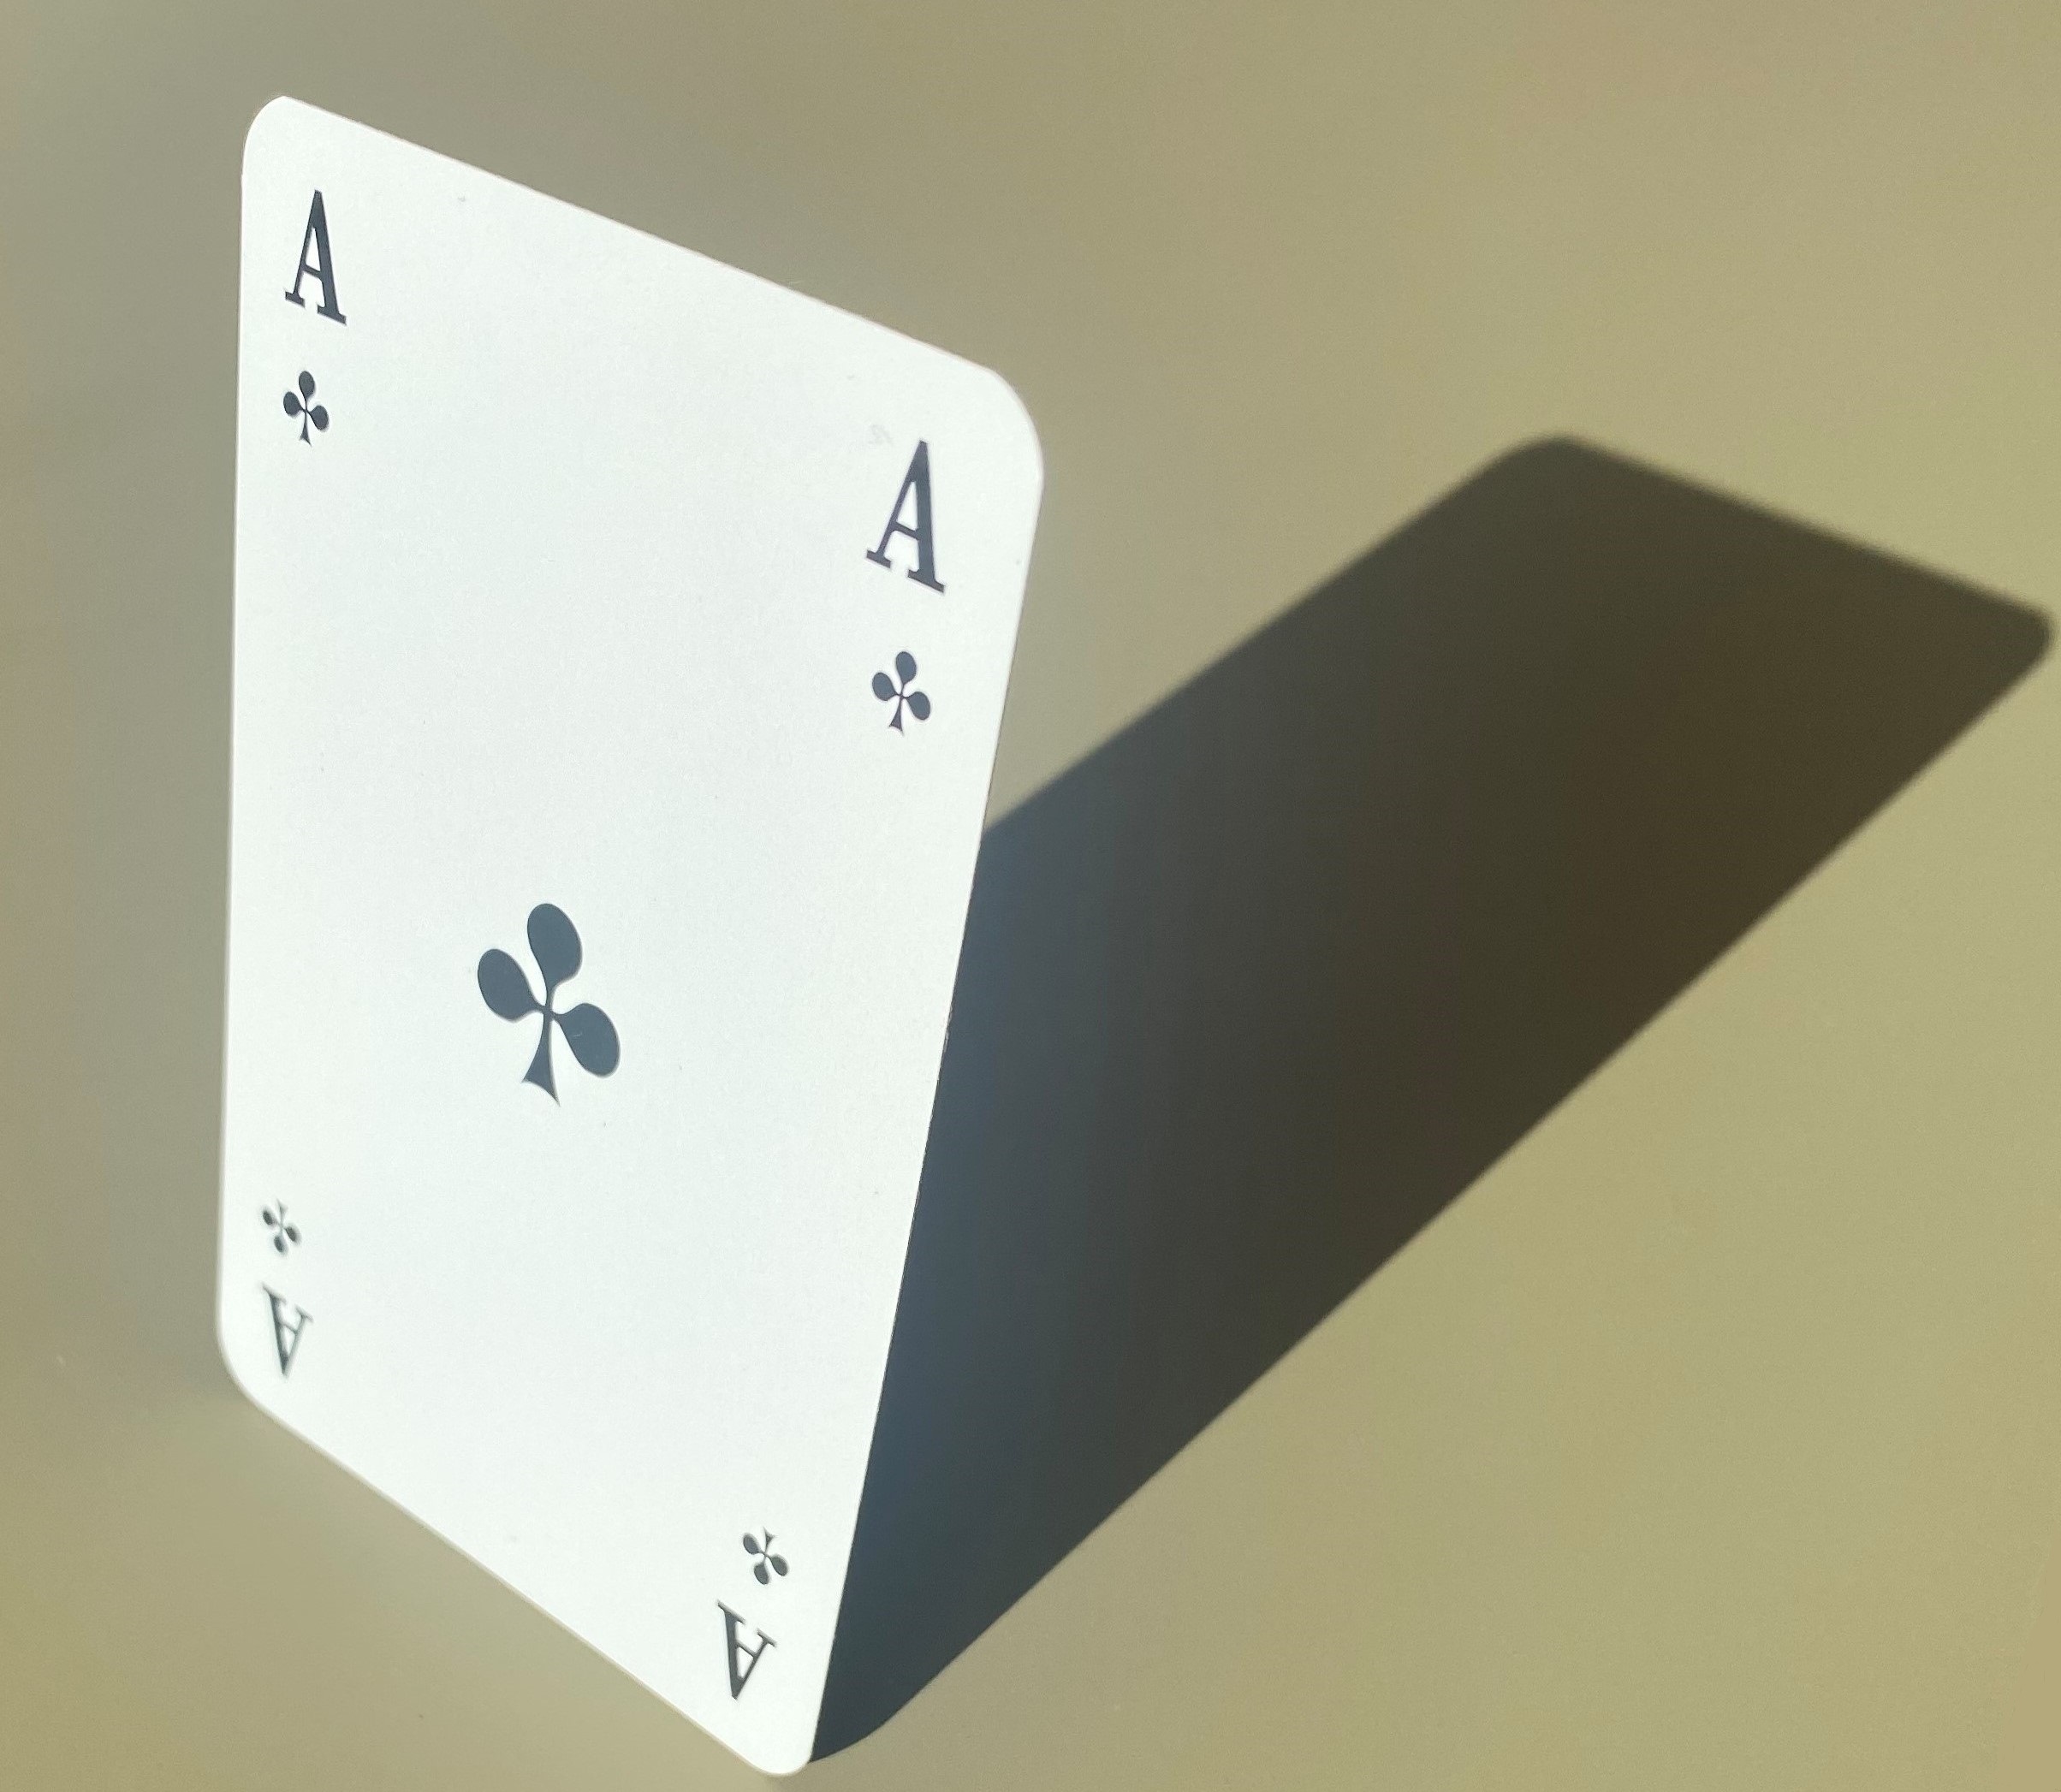 Ace of spades as symbol for luck with MBM Future Health 